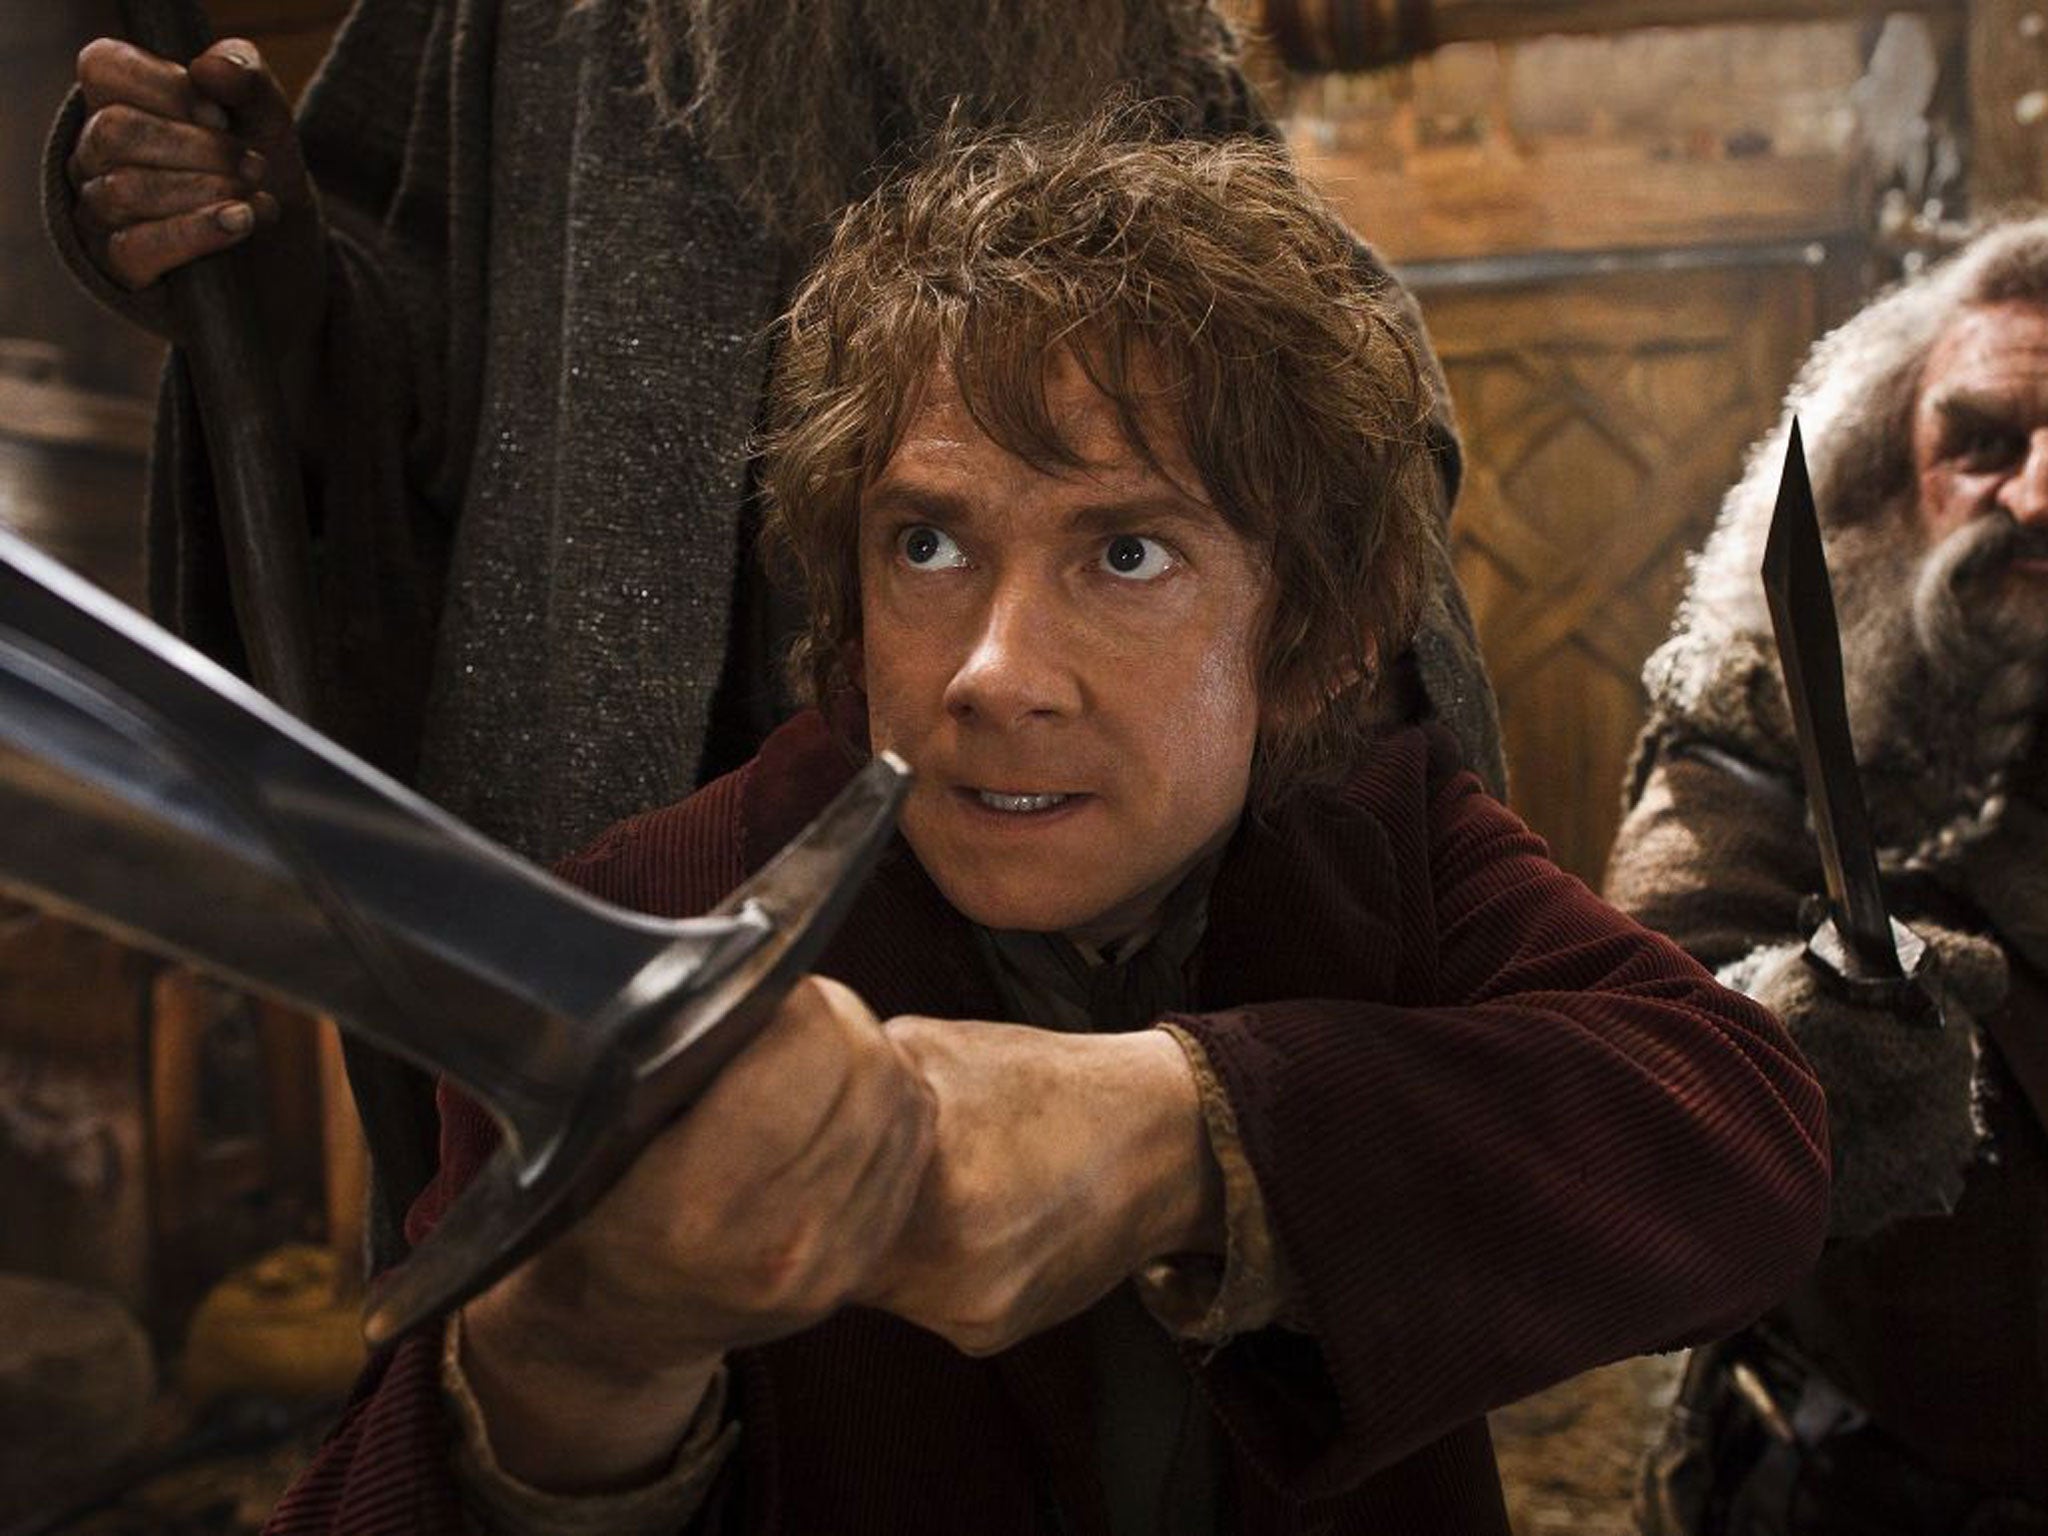 Knives out: Martin Freeman in a scene from The Hobbit: The Desolation of Smaug